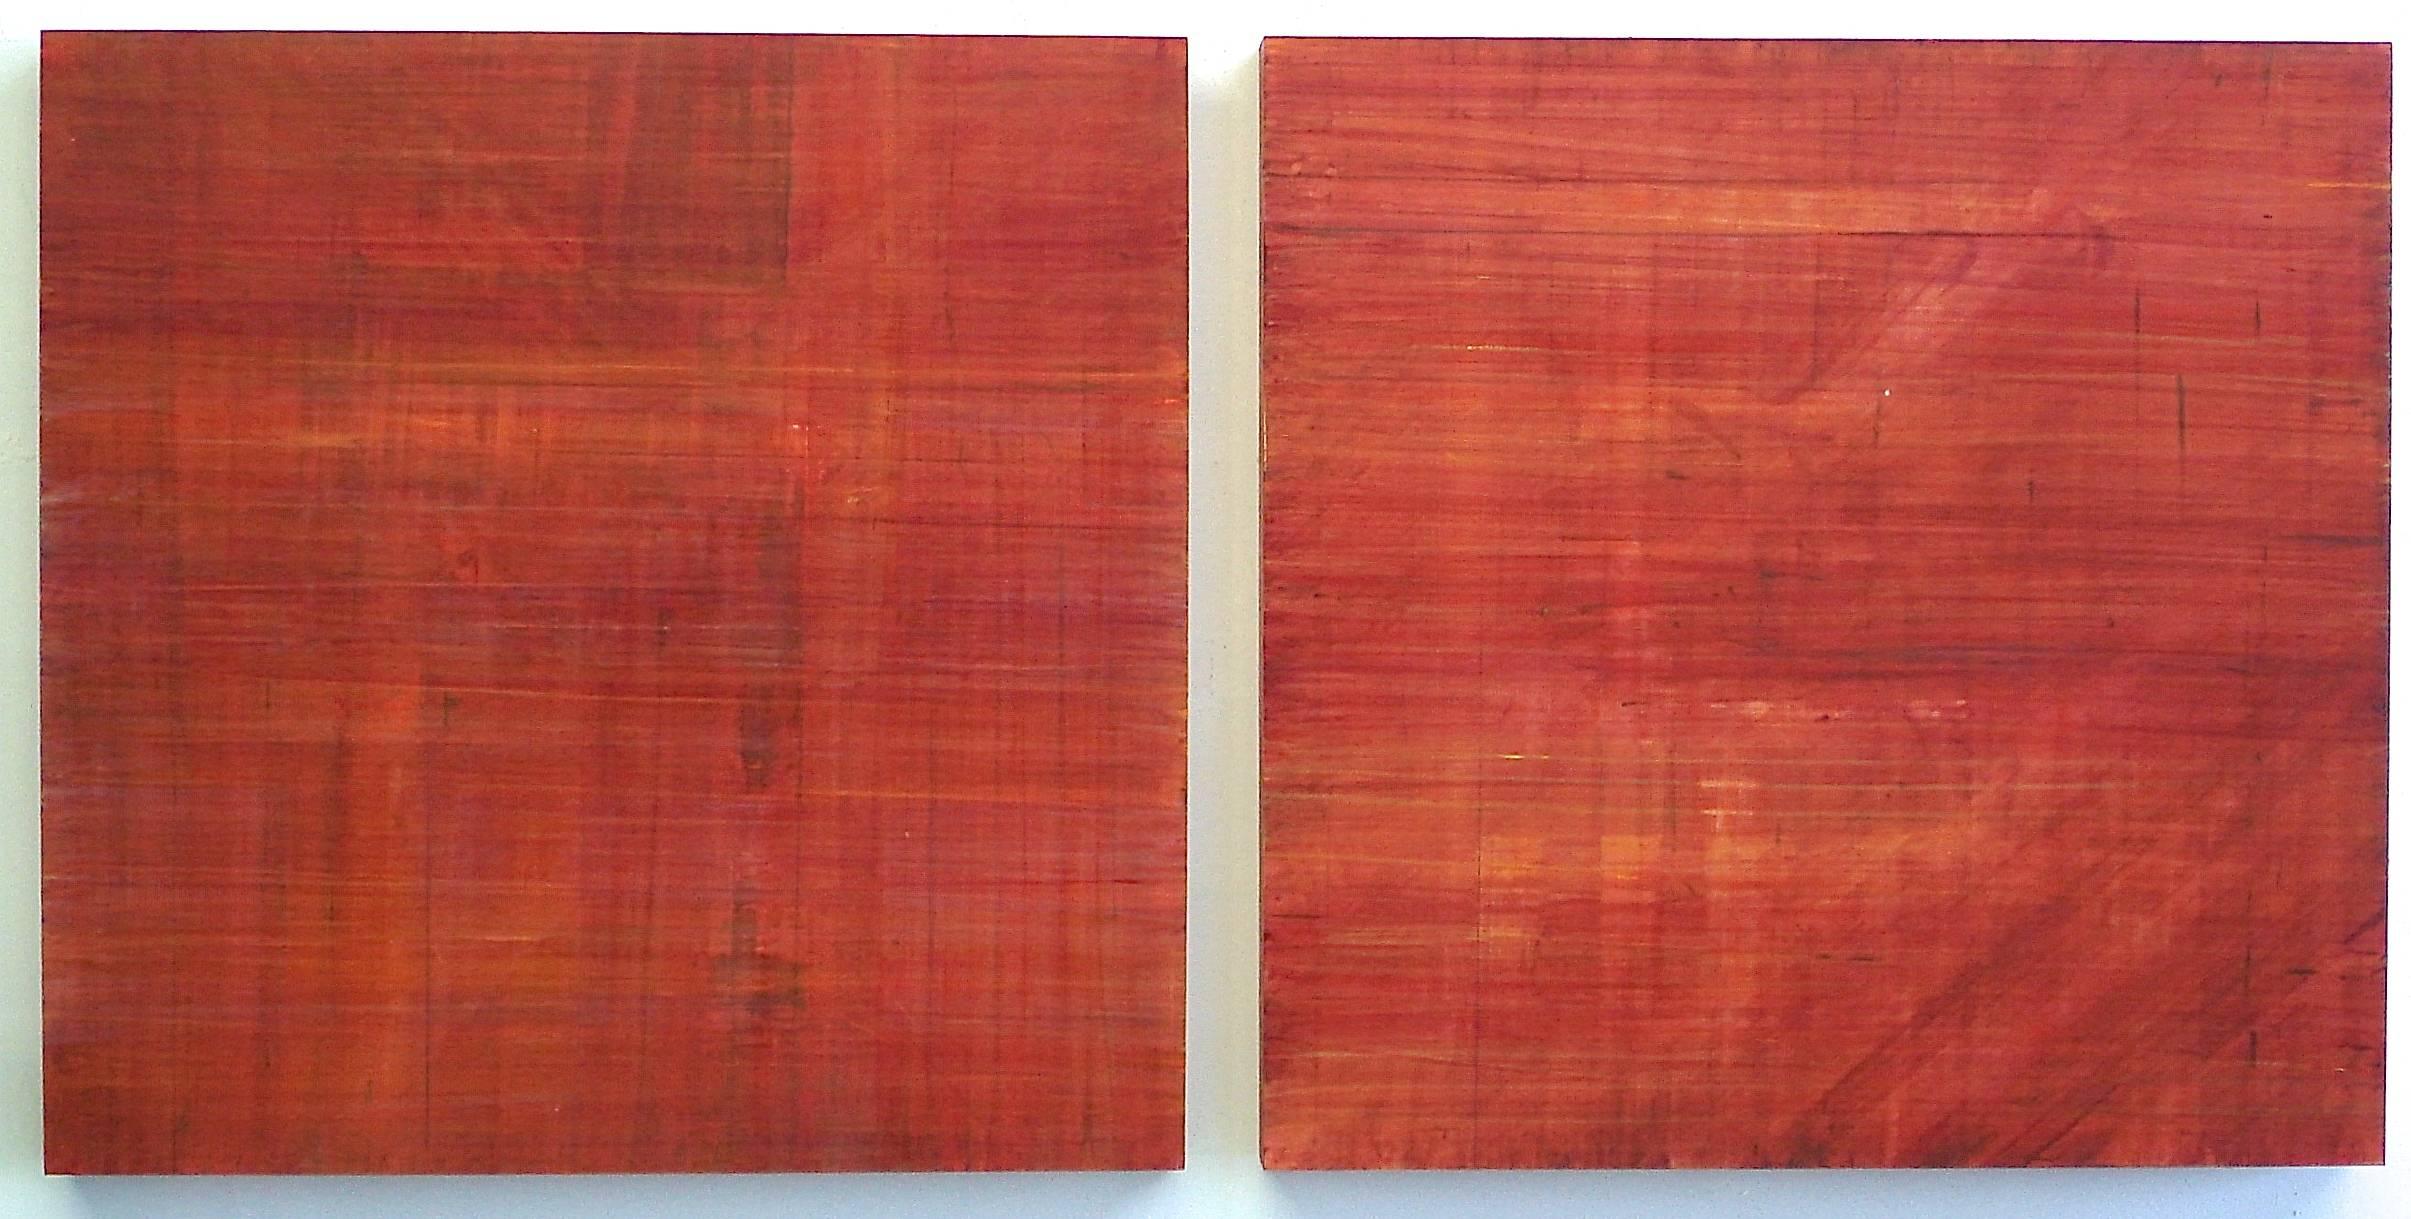 Ginny Fox Abstract Painting - Minimalist Abstract Color Field Diptych Painting in Red and Orange (C15-3)